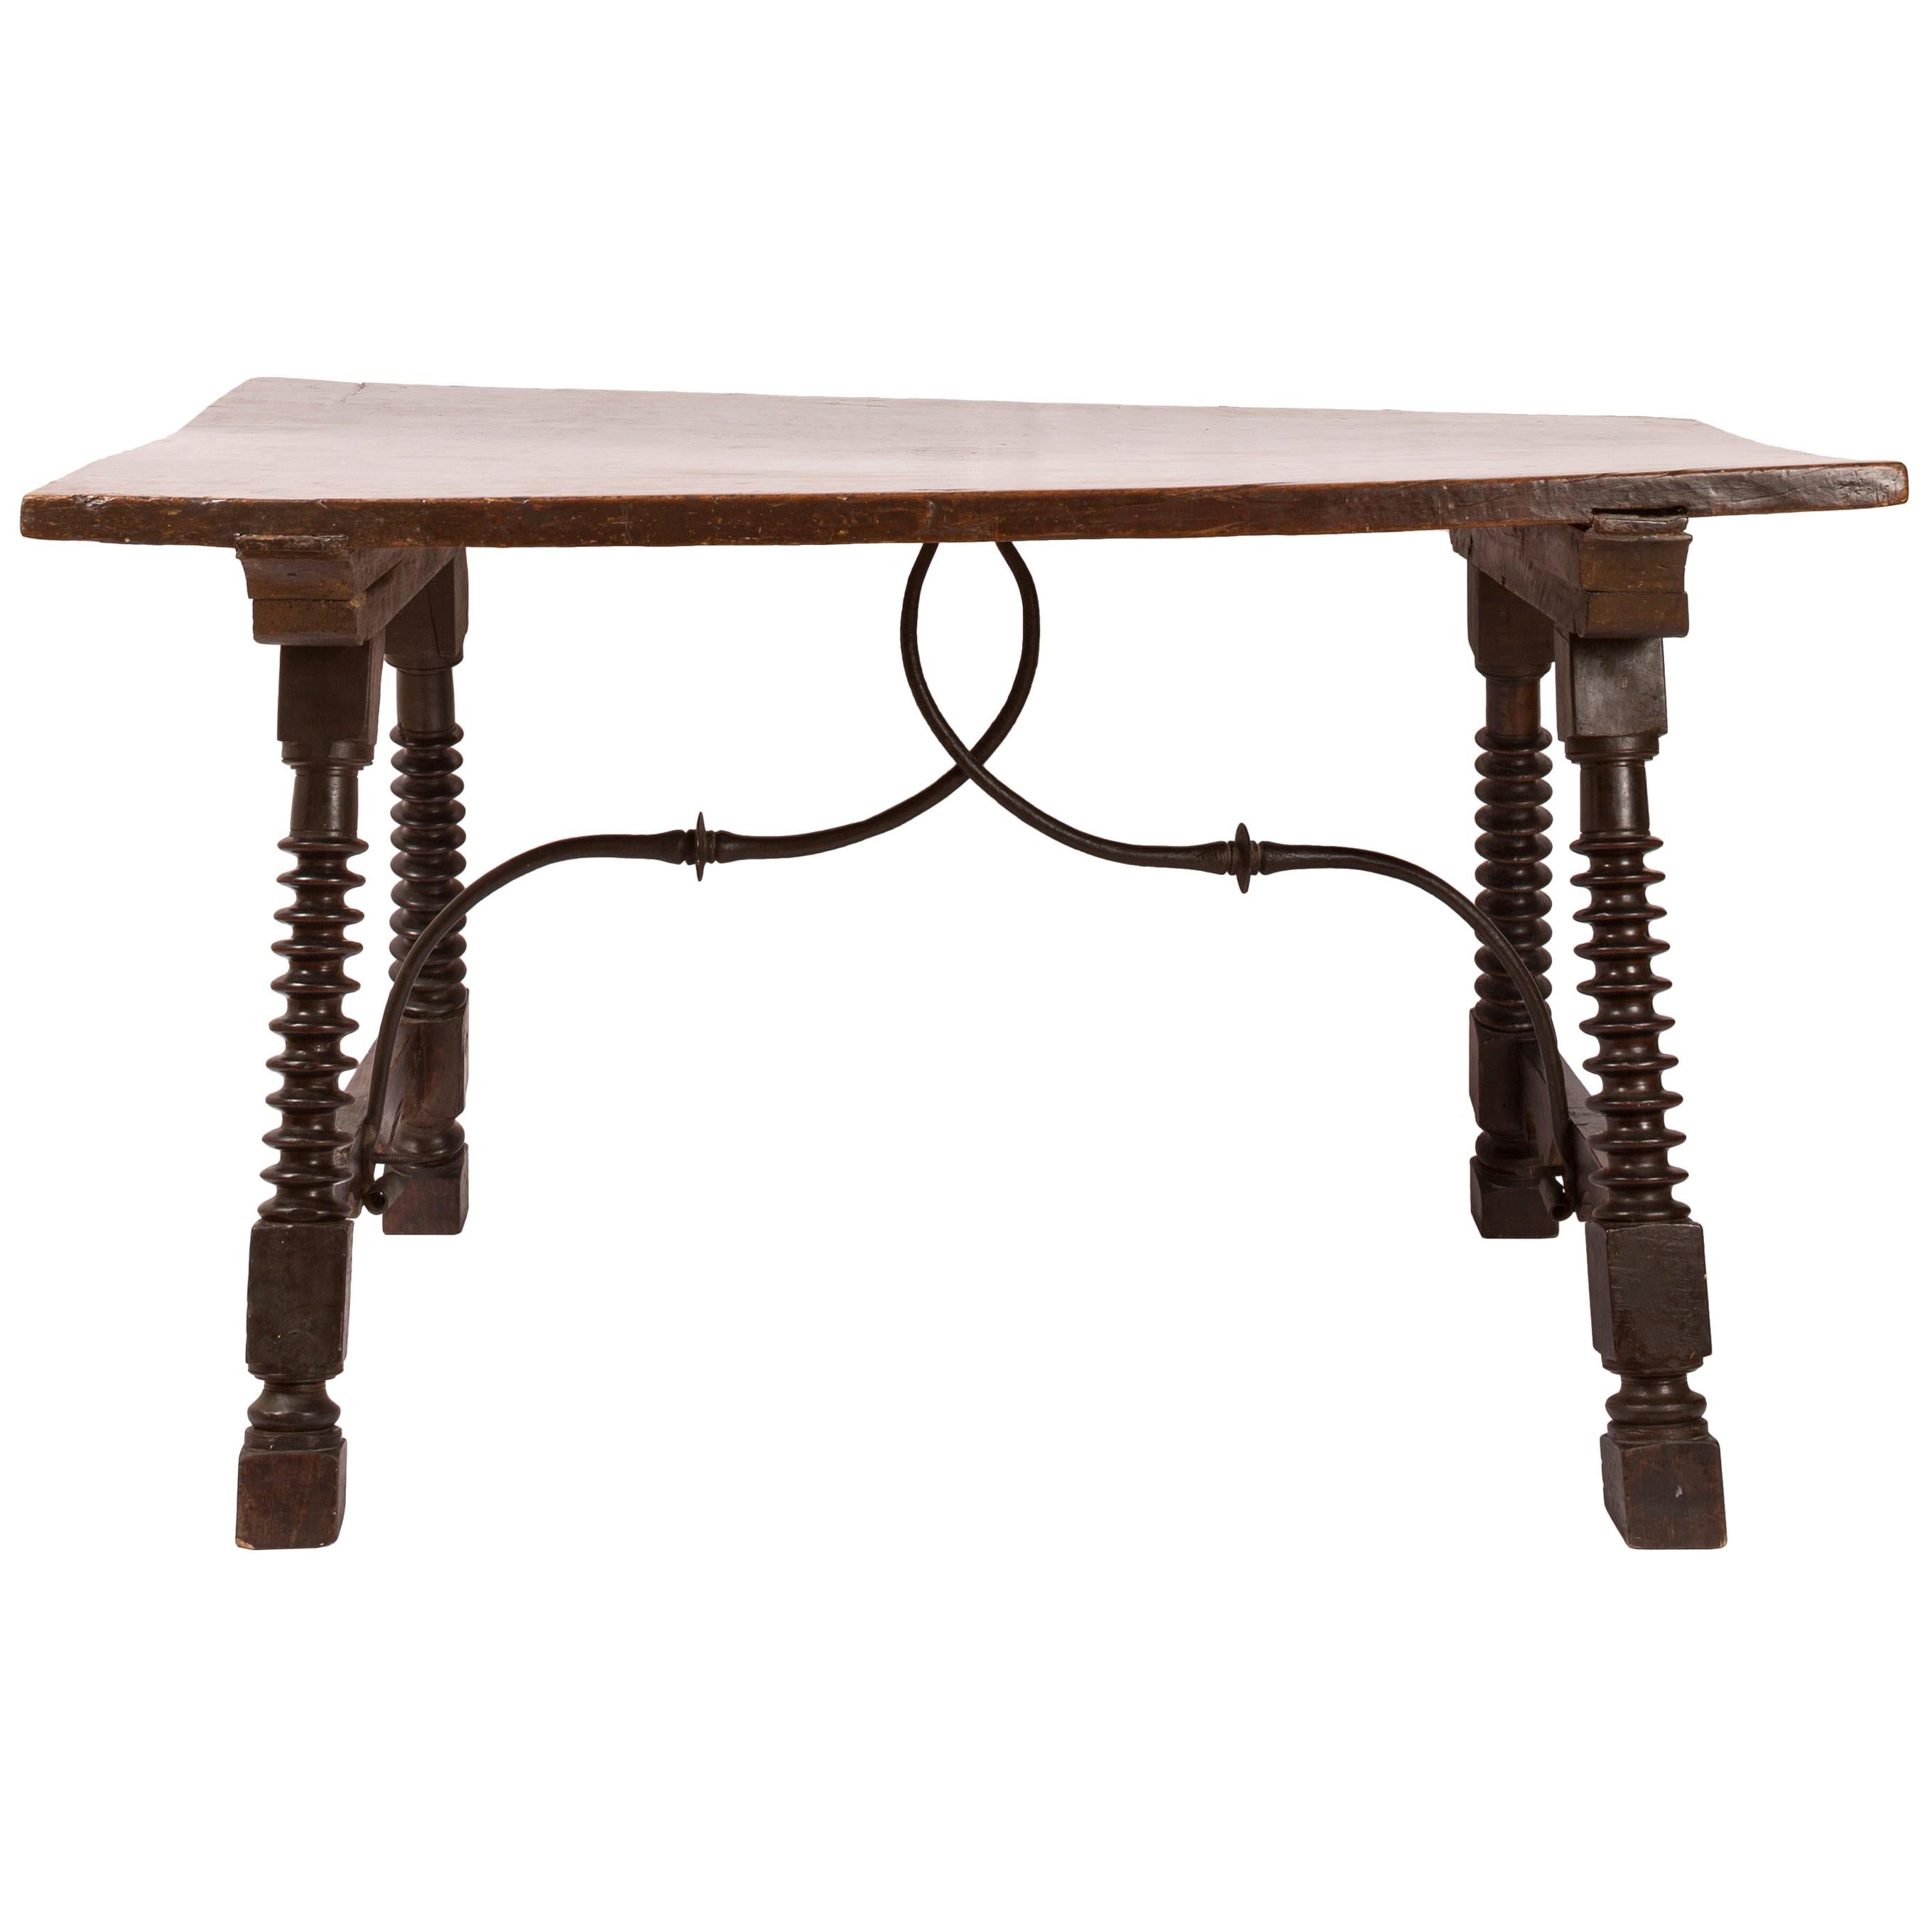 18th C. Spanish Trestle Style Writing Table, Spool Turned Legs and Wrought Iron